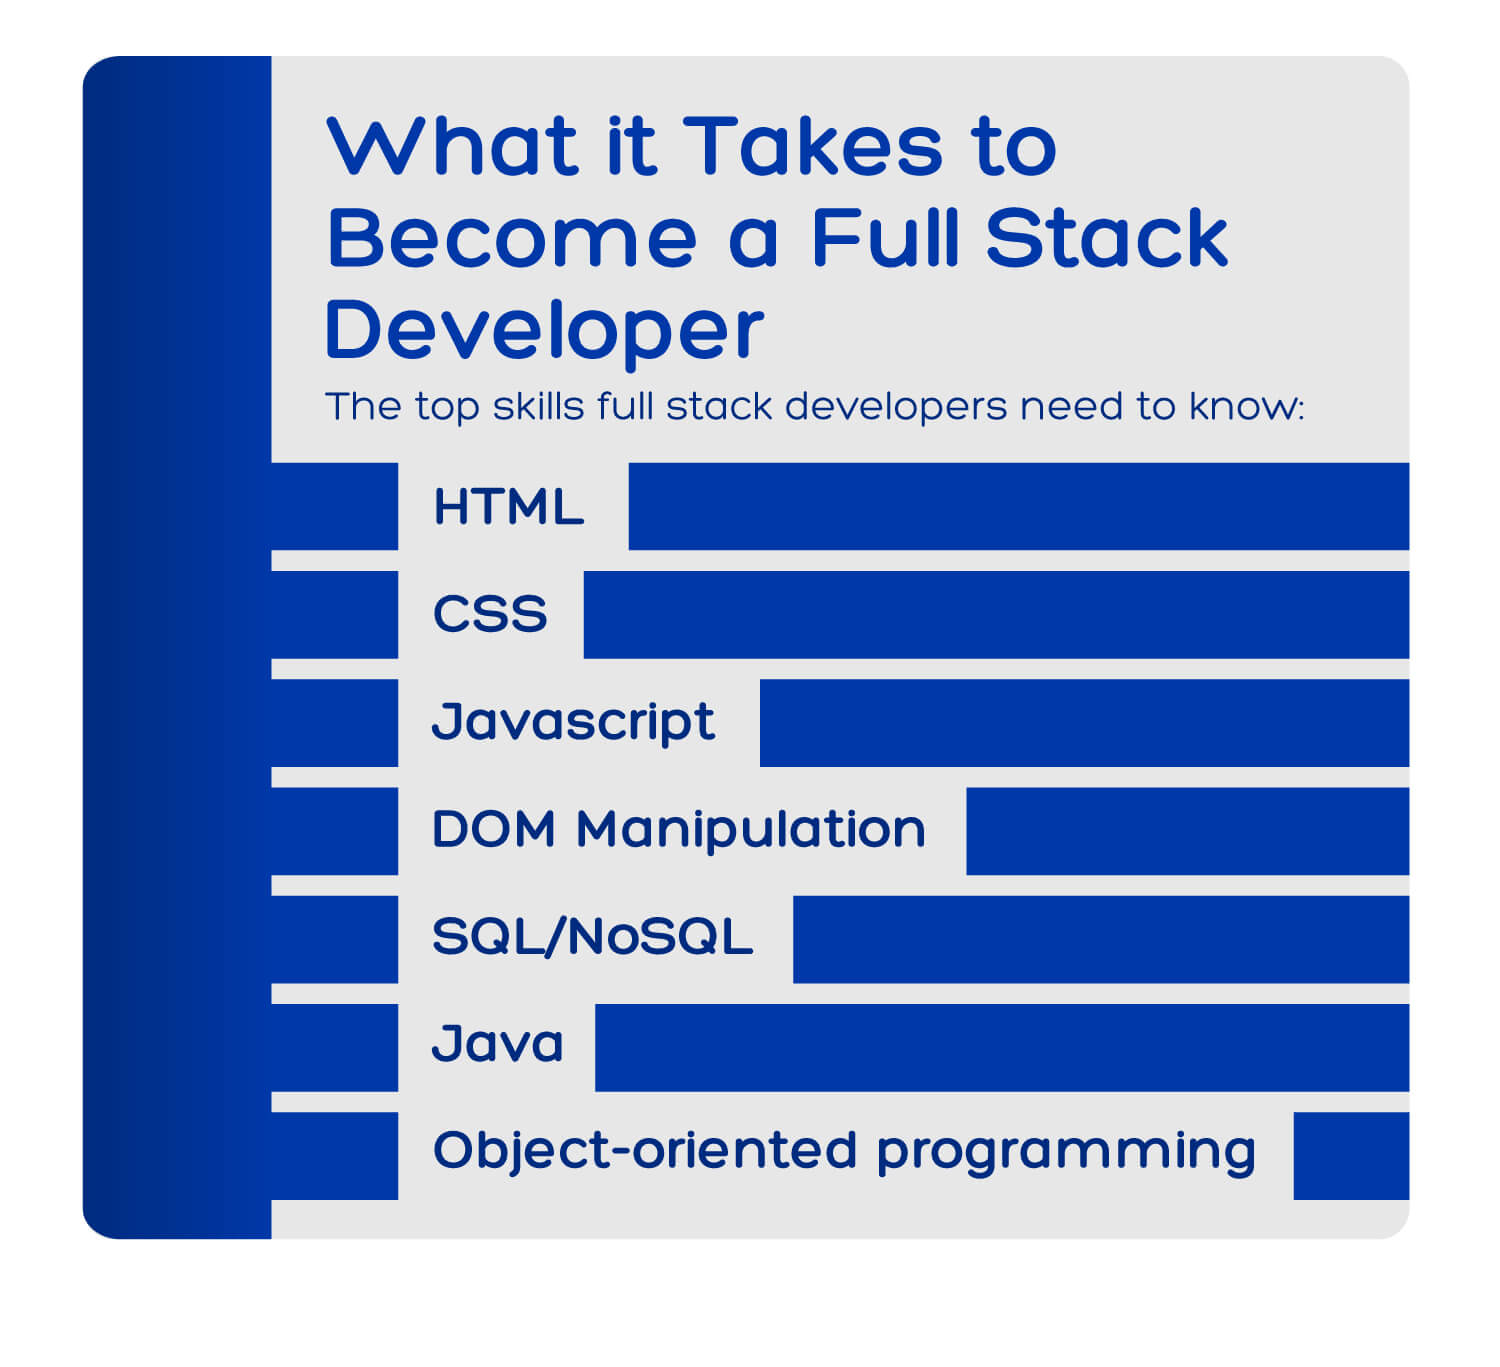 The skills you need to become a full stack developer